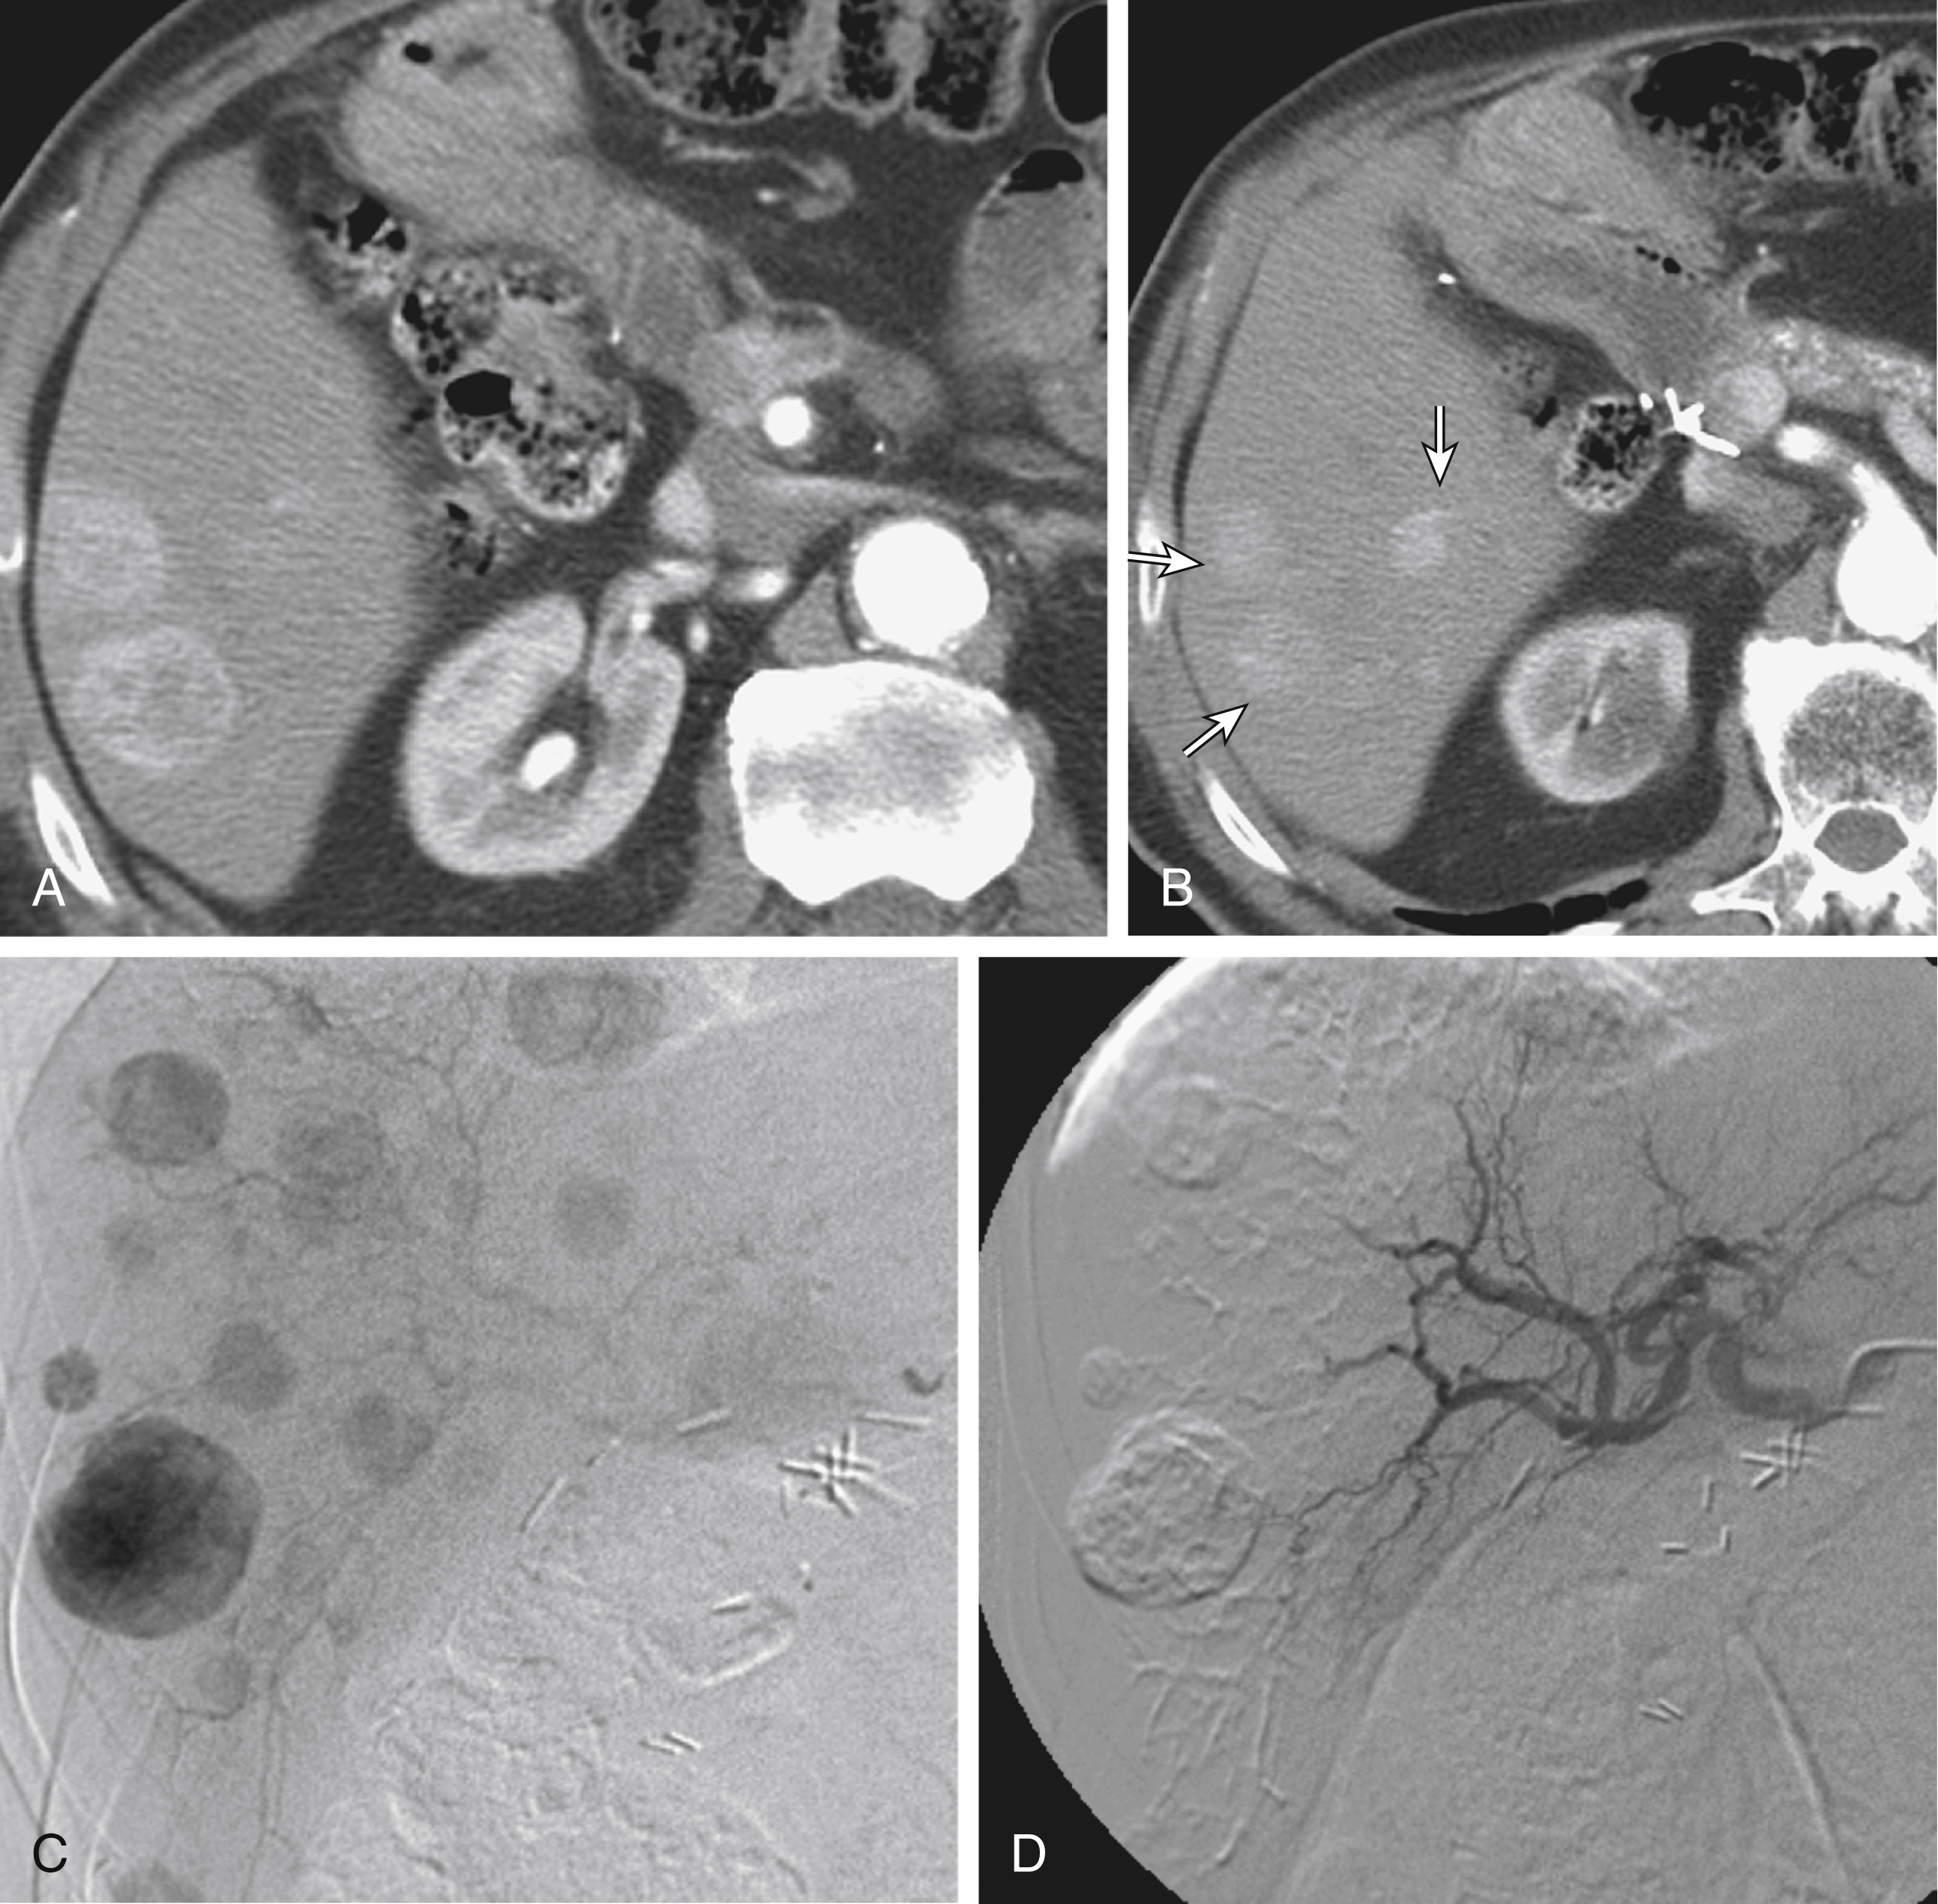 Fig. 36.2, (A)–(B) Arterial-phase computed tomography slices through liver of a patient with metastatic neuroendocrine tumor show multiple hypervascular masses ( arrows ). (C) In same patient, delayed phase of catheter arteriography (catheter tip in common hepatic artery) shows numerous hypervascular masses throughout both liver lobes. (D) After particle embolization of the right hepatic artery, arteriography demonstrates stasis in right hepatic artery and branches, with characteristic “pruned tree” appearance, and retained contrast in the embolized tumors. Left hepatic artery remains patent.